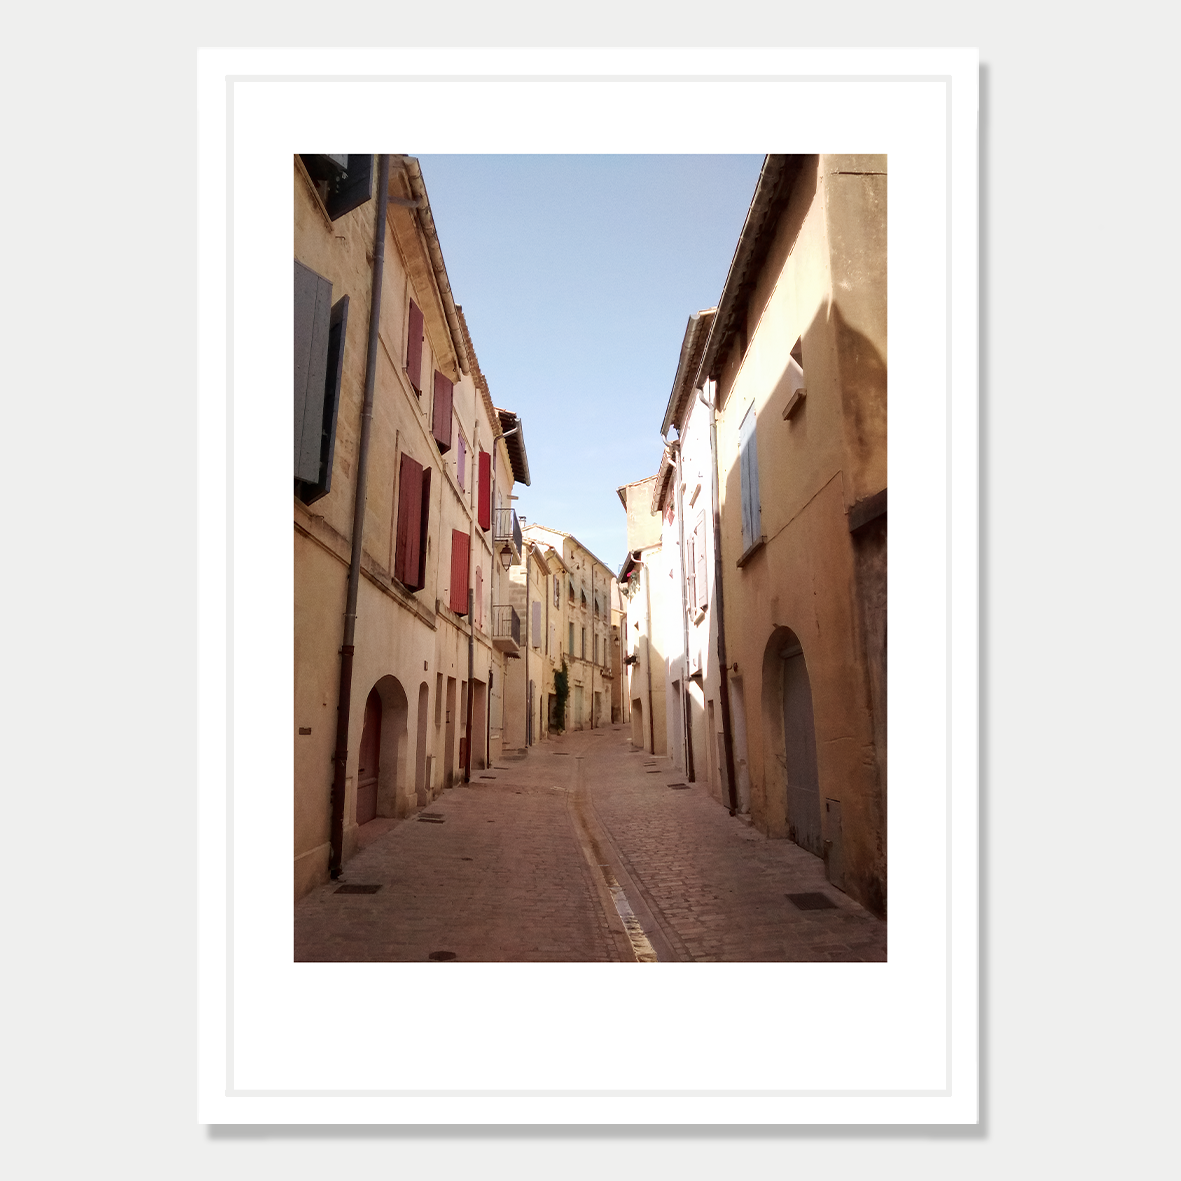 Looking down an Empty Street in Uzes, a small town in France Photographic Art Print in a Skinny White Frame